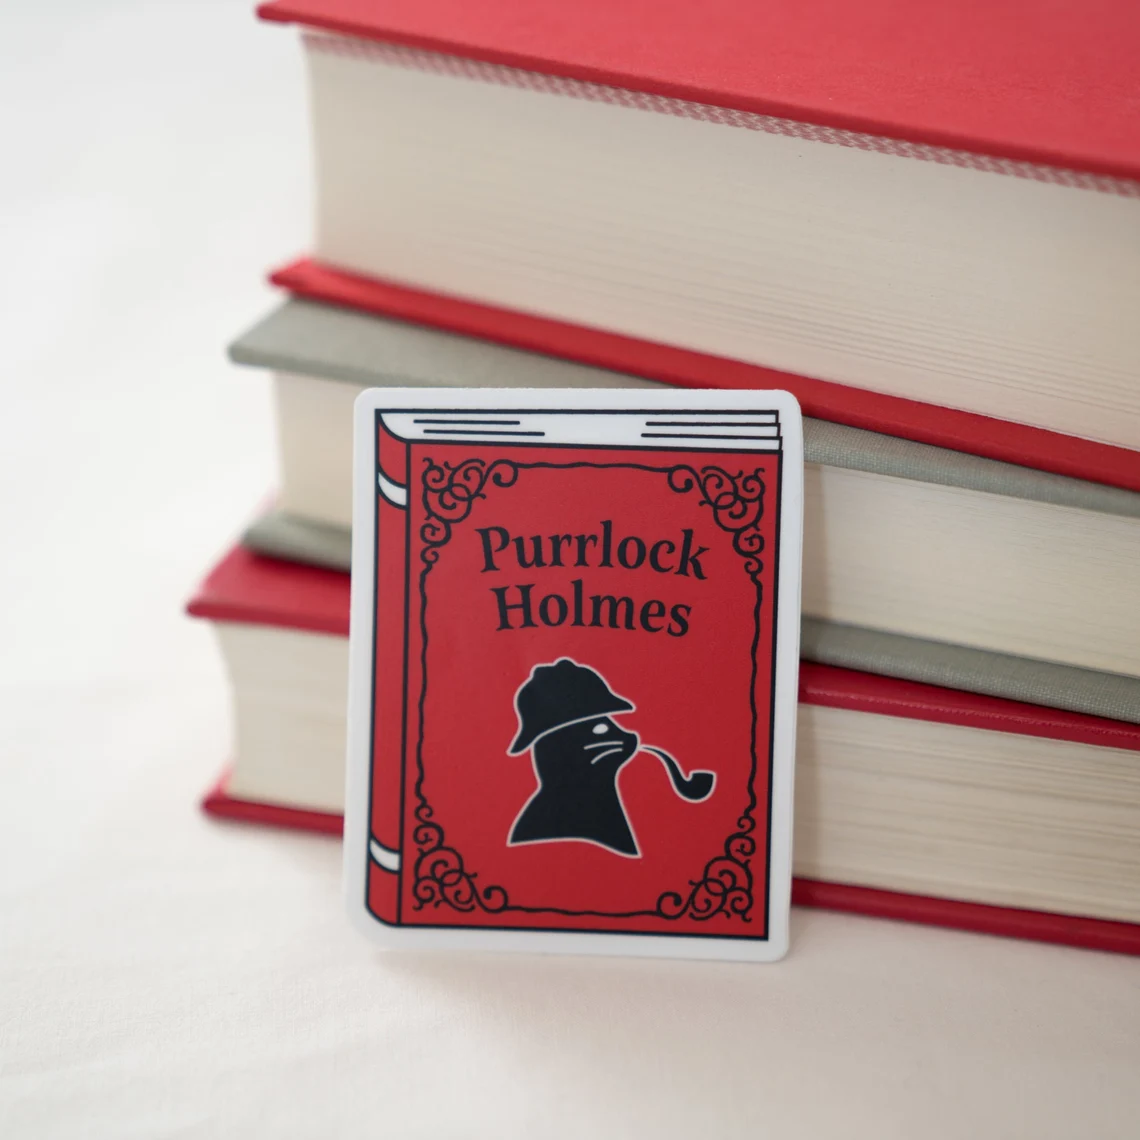 photo of a red book-shaped sticker with a cat in sillhouette. above the cat is the text "Purrlock Holmes"